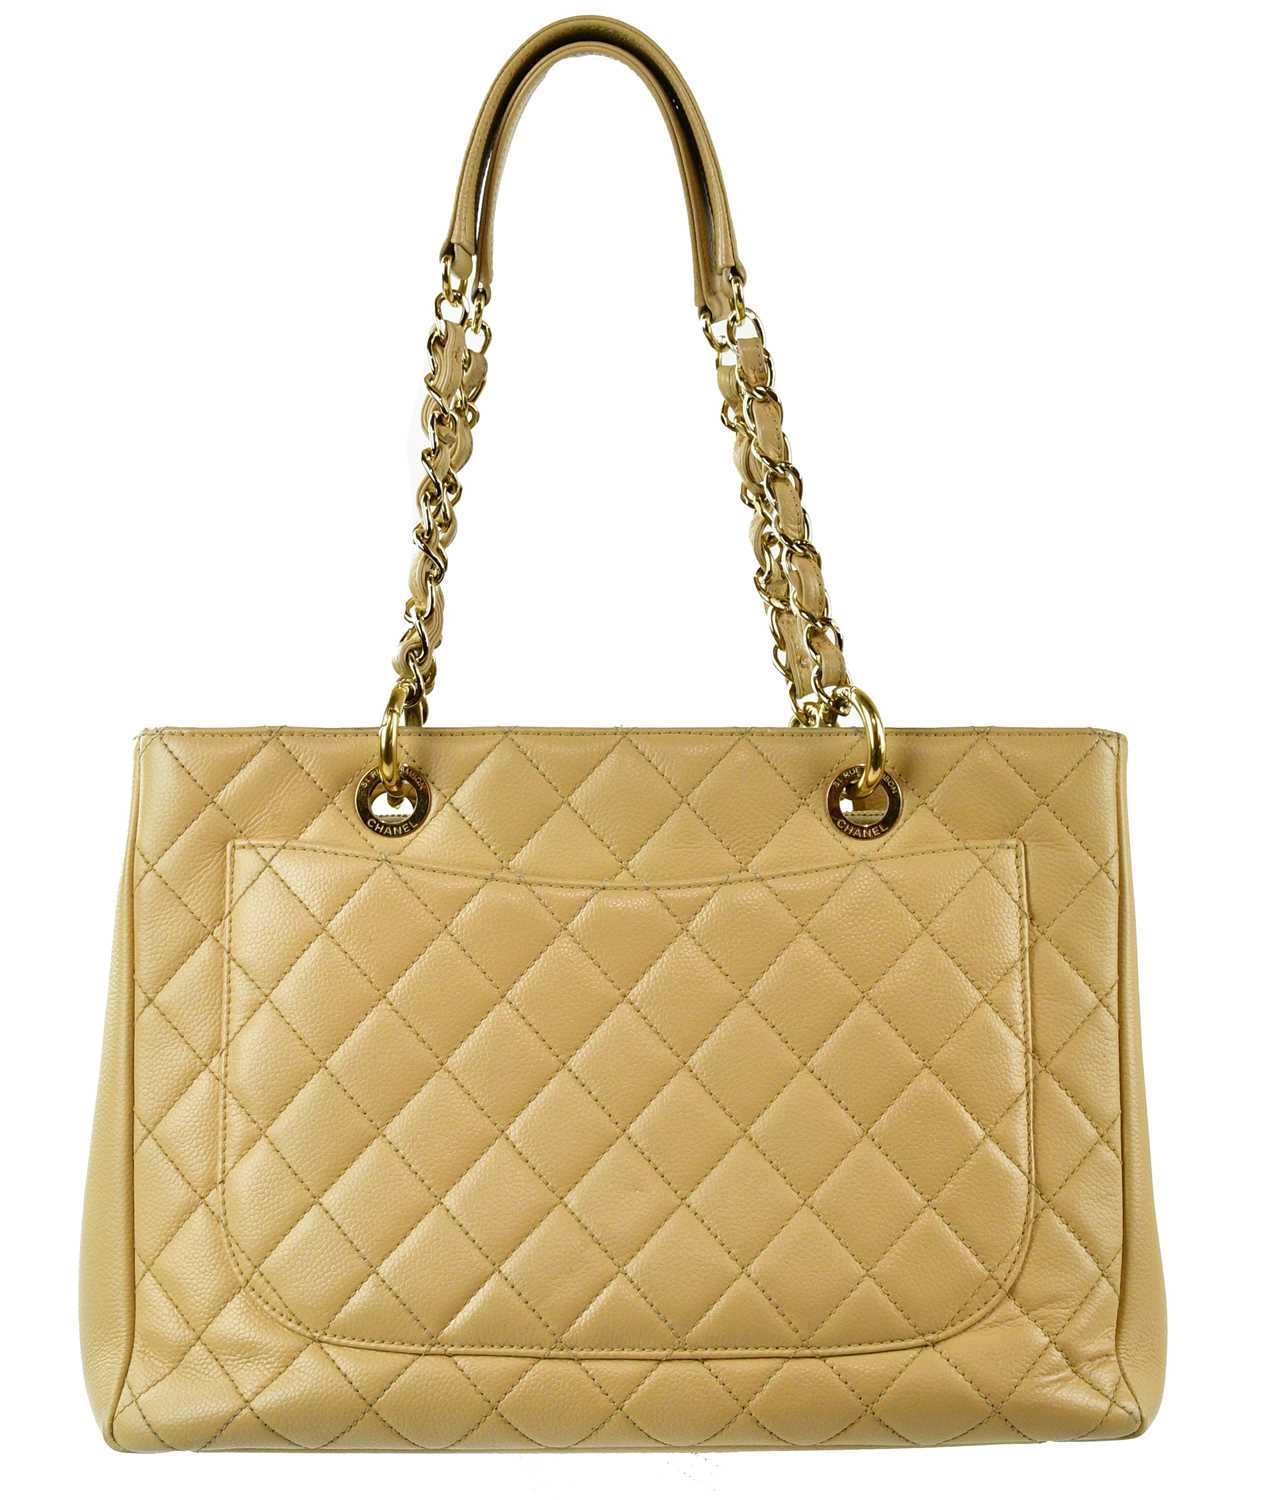 CHANEL; a cream circa 2014 caviar leather quilted GST grand shopping tote bag with signature - Image 4 of 5